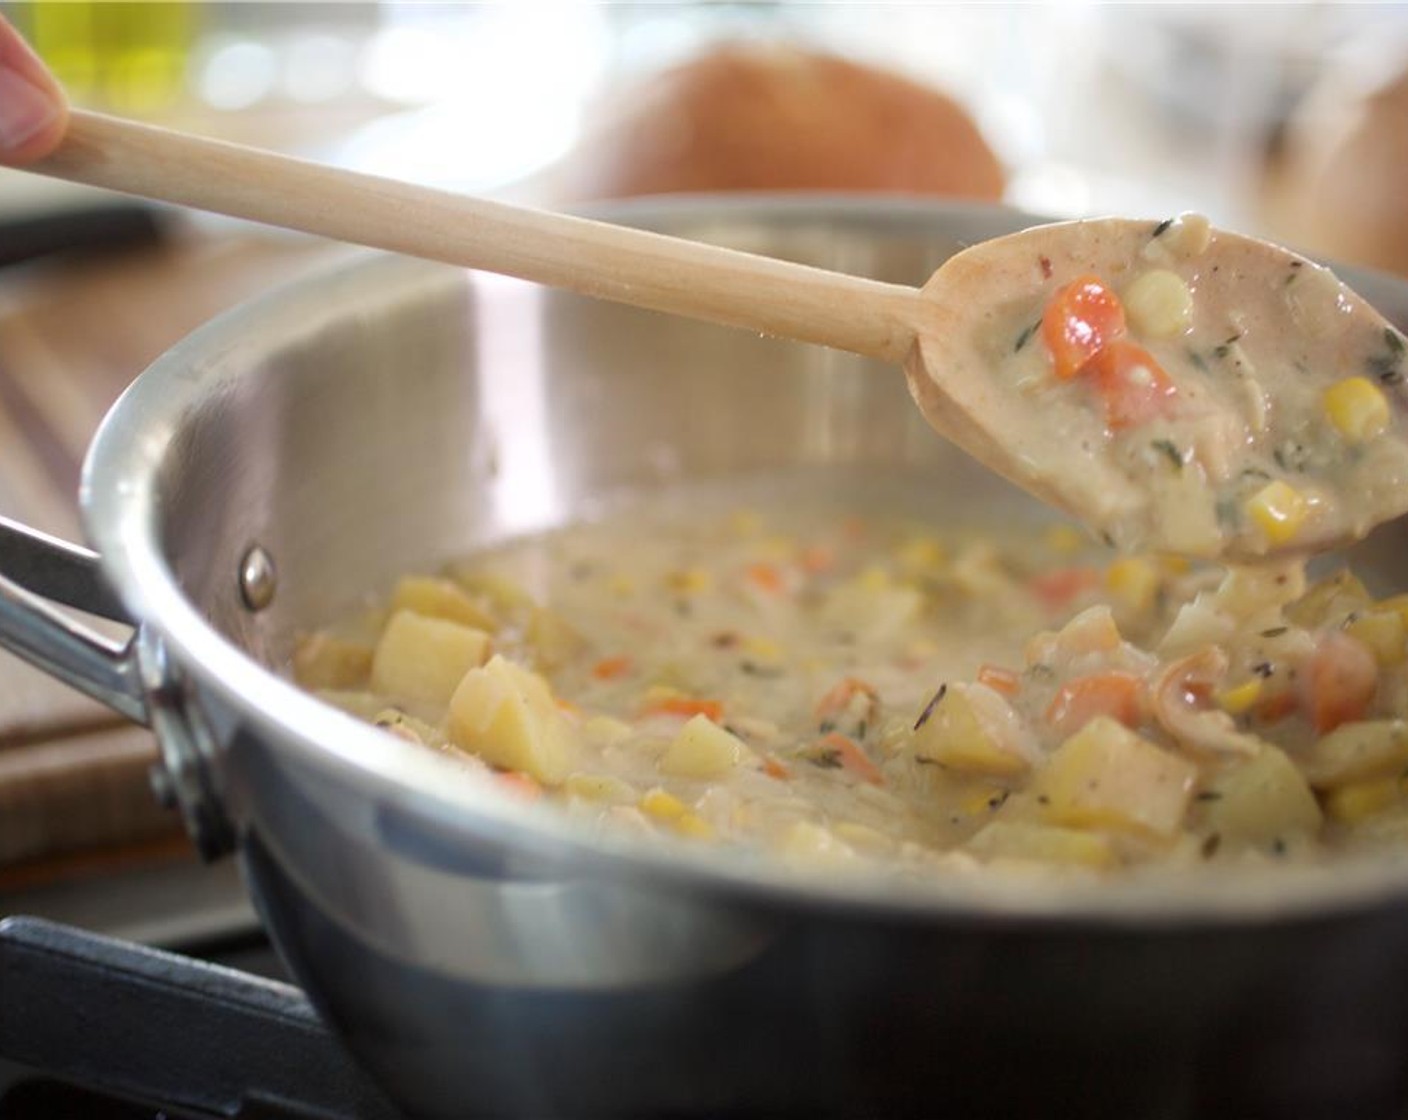 step 11 While stirring, pour the clam juice into the mixture in a steady stream until fully blended and no lumps remain. Reduce the heat to low and simmer for 14 minutes, until the chowder starts to thicken.